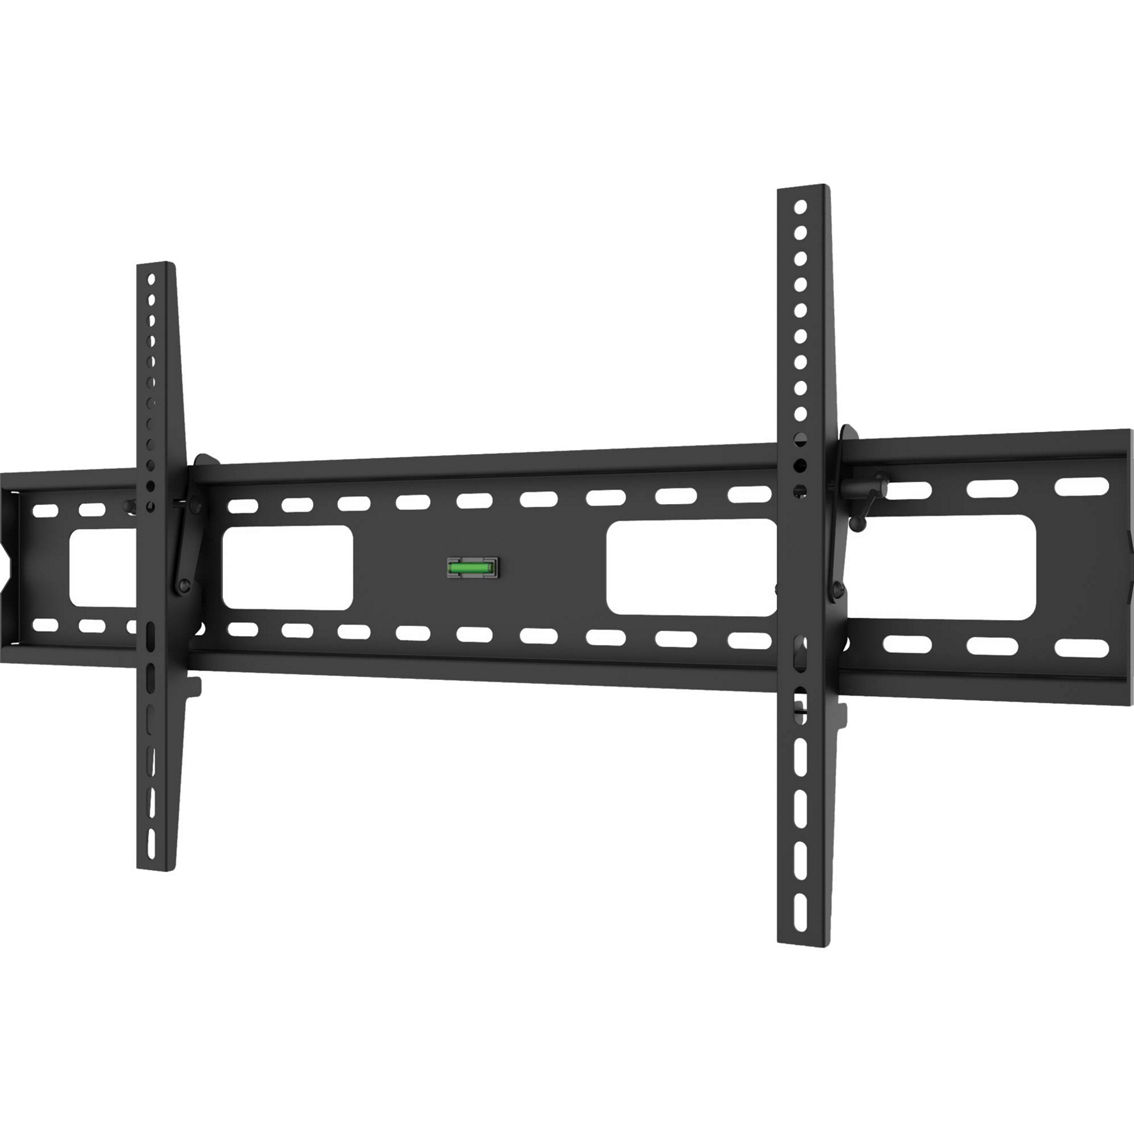 ProMounts Tilt TV Wall Mount for 50 to 90 in. TVs up to 165 lb. - Image 2 of 9